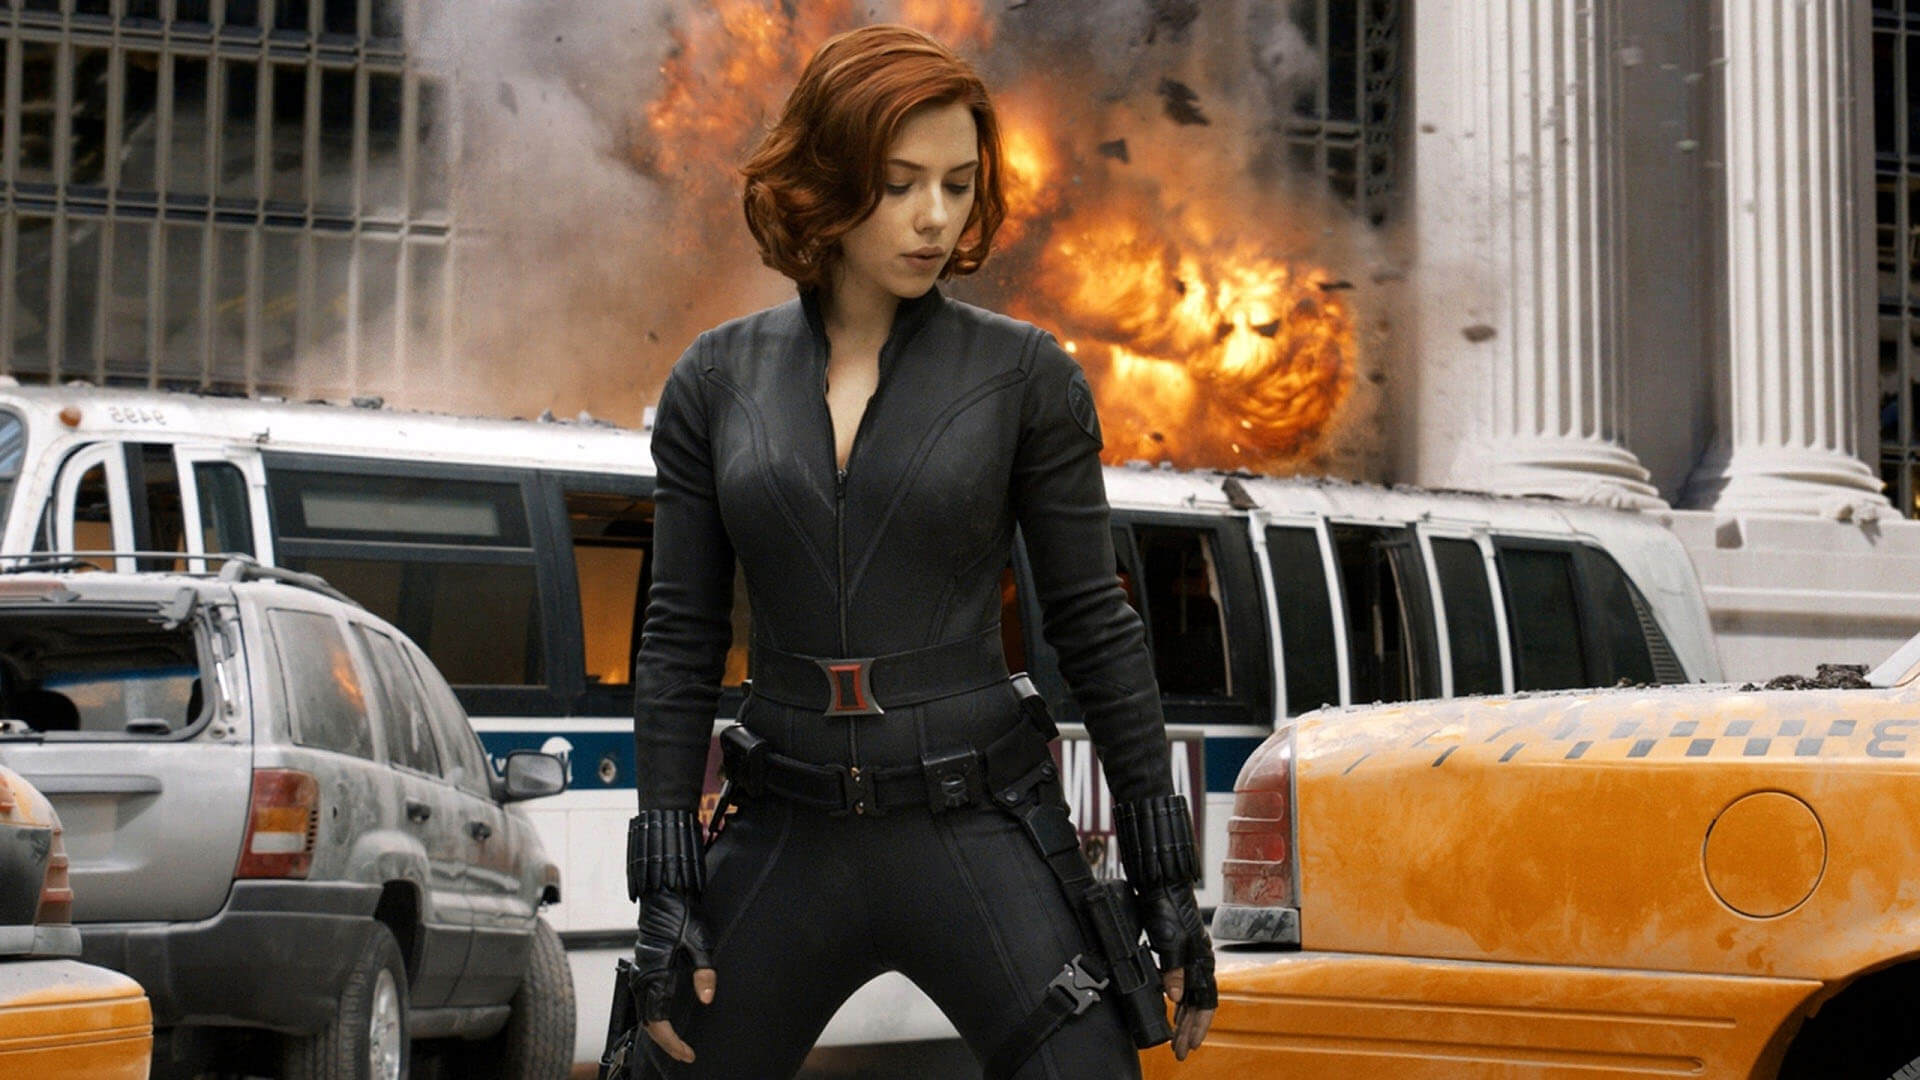 Marvel’s ‘Black Widow’ Casting Is Beginning; New Character Breakdowns Revealed